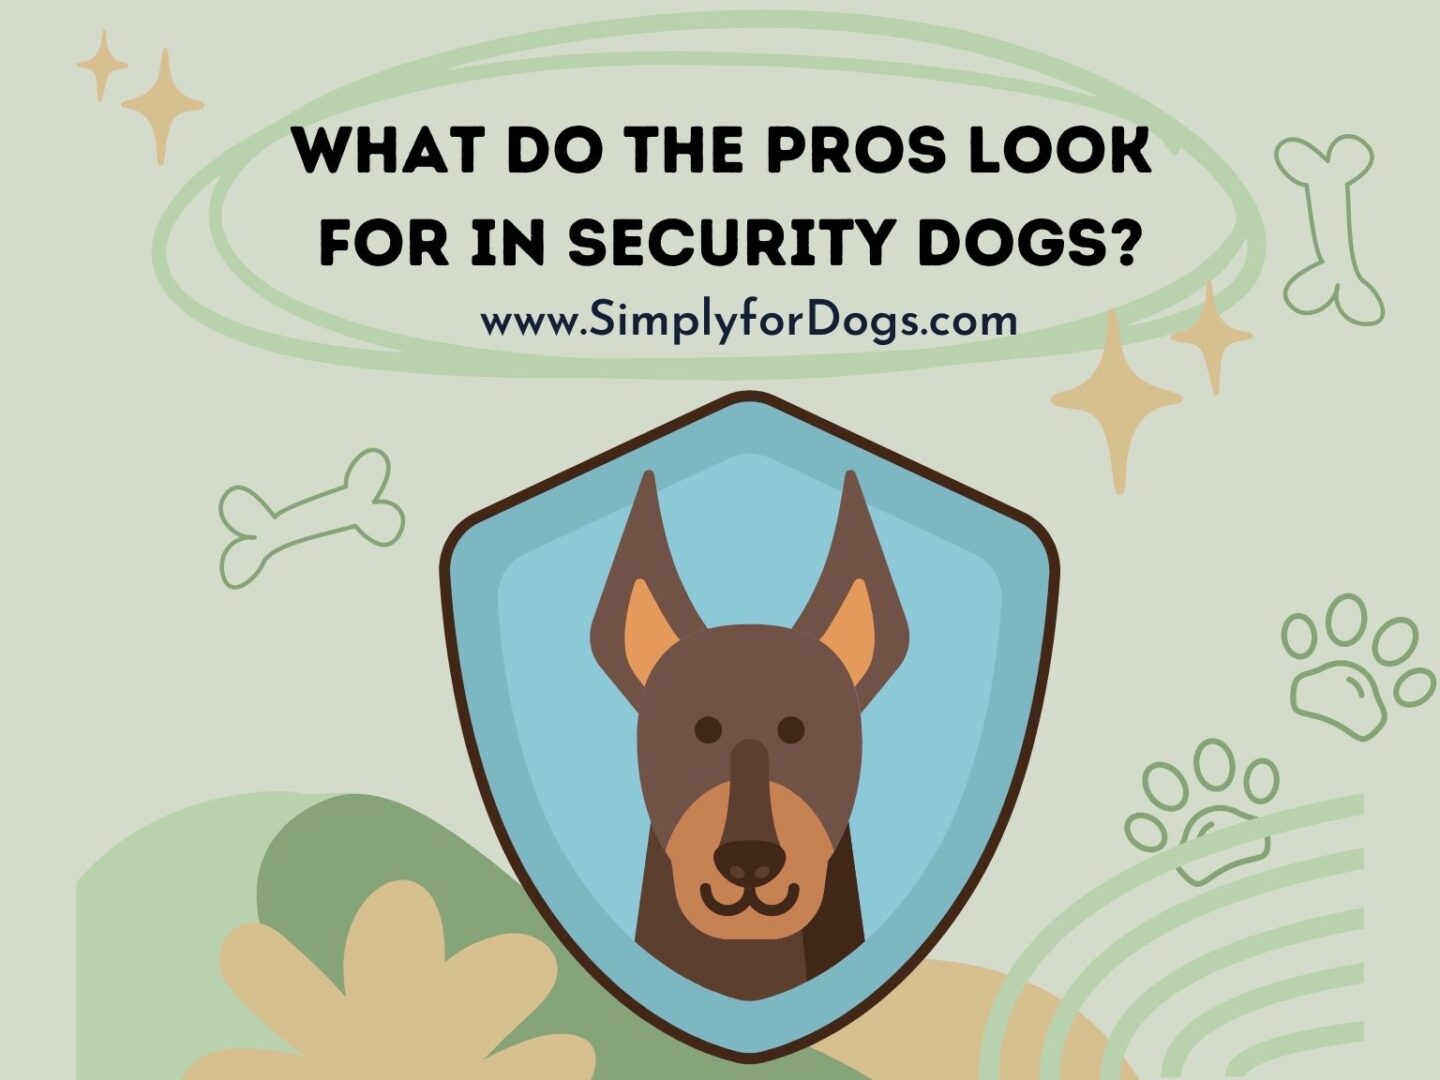 What Do the Pros Look for in Security Dogs